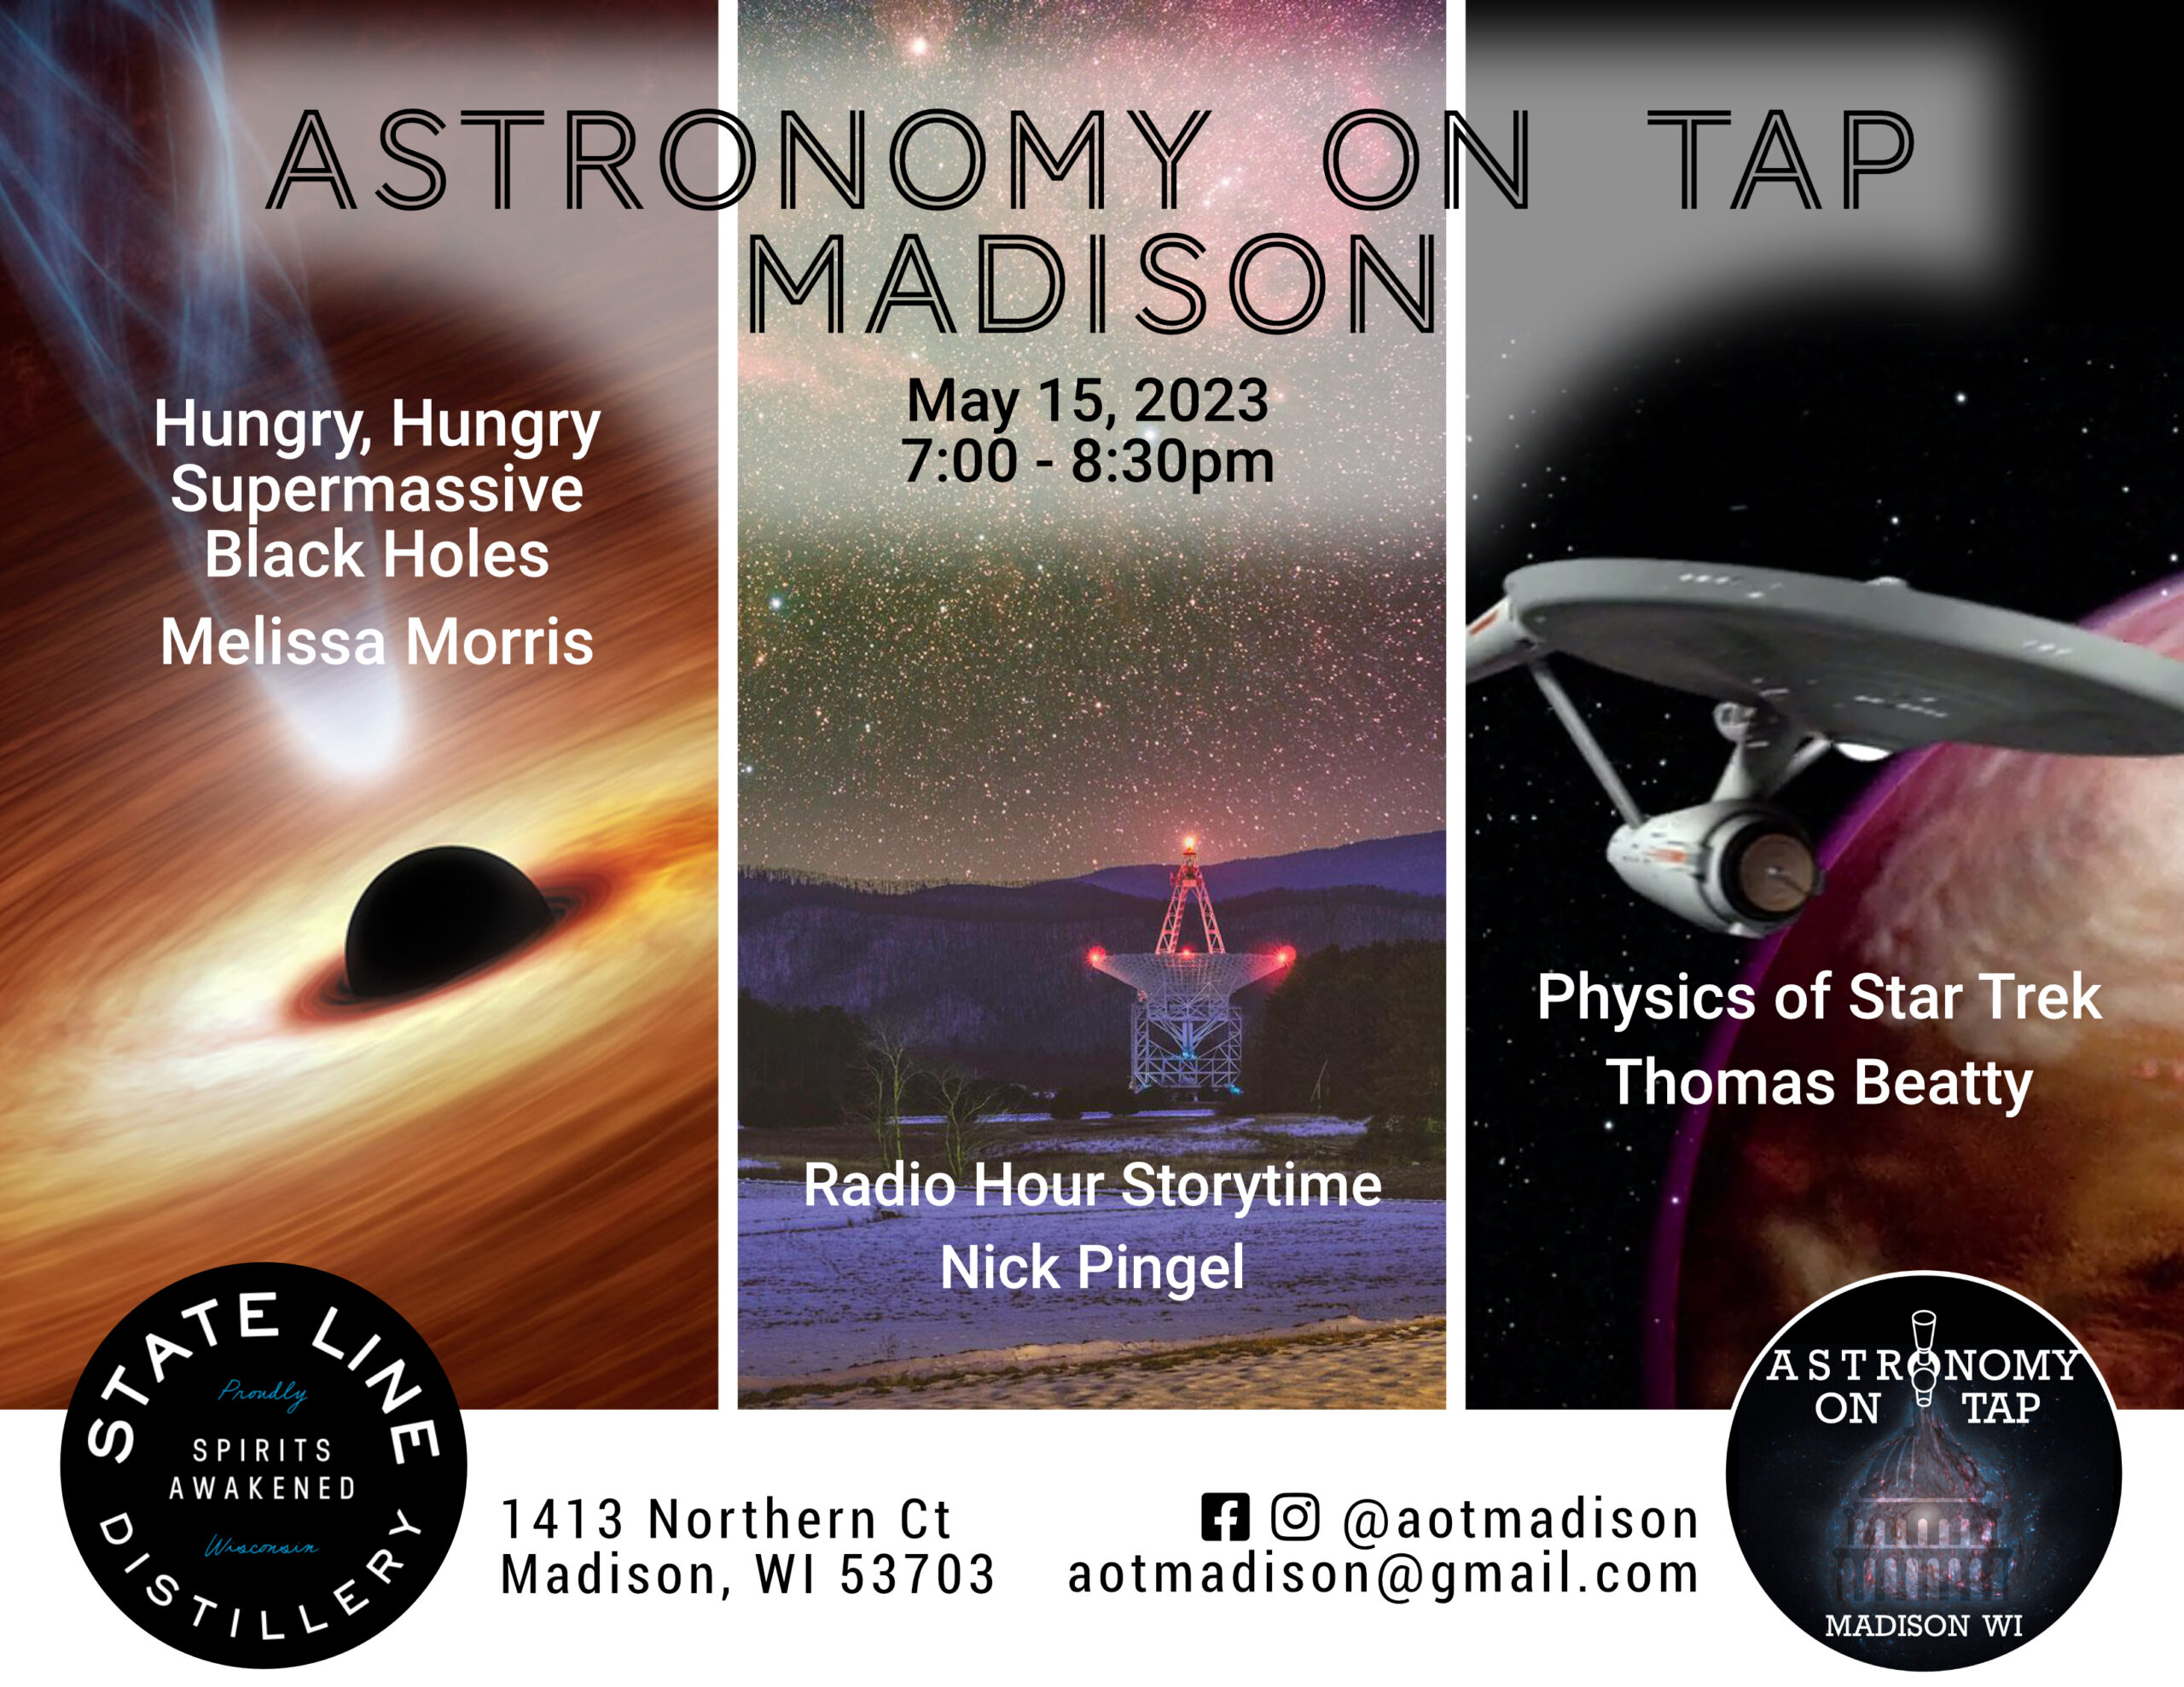 Title: Astronomy on Tap Madison May 15th, 2023 7-8:30pm at the top of the image Background shows a Black Hole with emission exiting, a radio telescope dish below a night sky, and a star trek ship orbiting a planet. At bottom is the State Line Distillery logo and the AoT Madison logo.